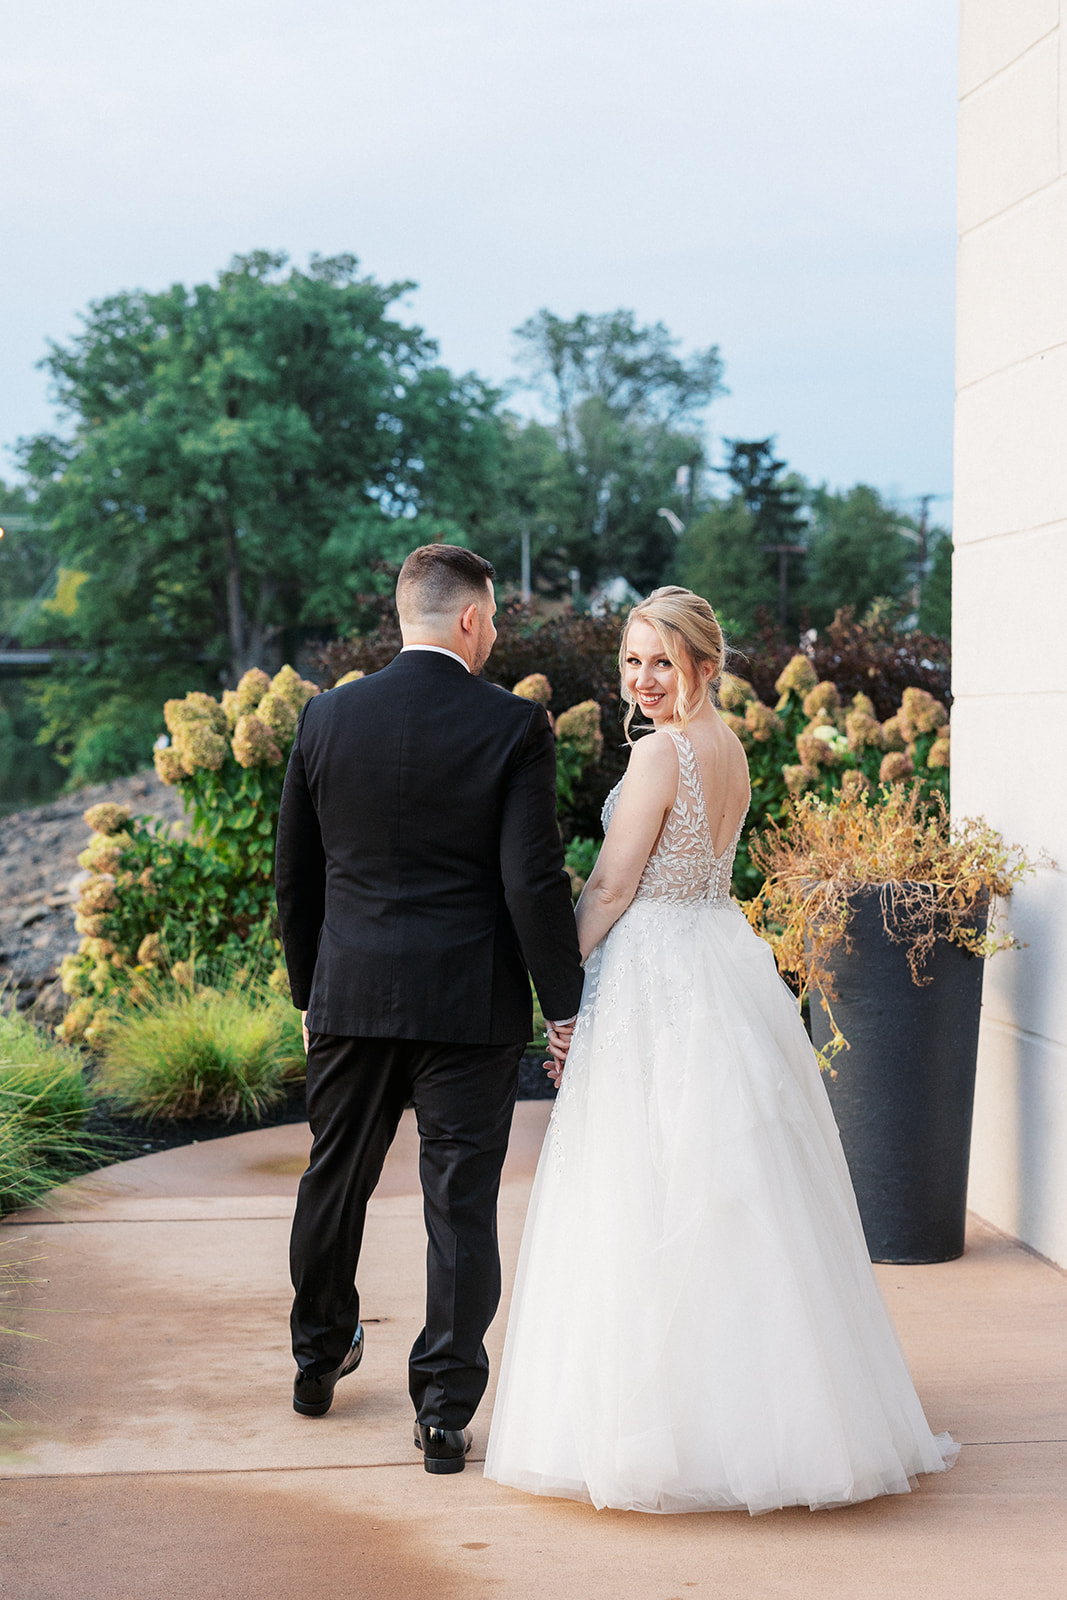 A bride looks back over her shoulder while walking hand in hand with her groom through a garden